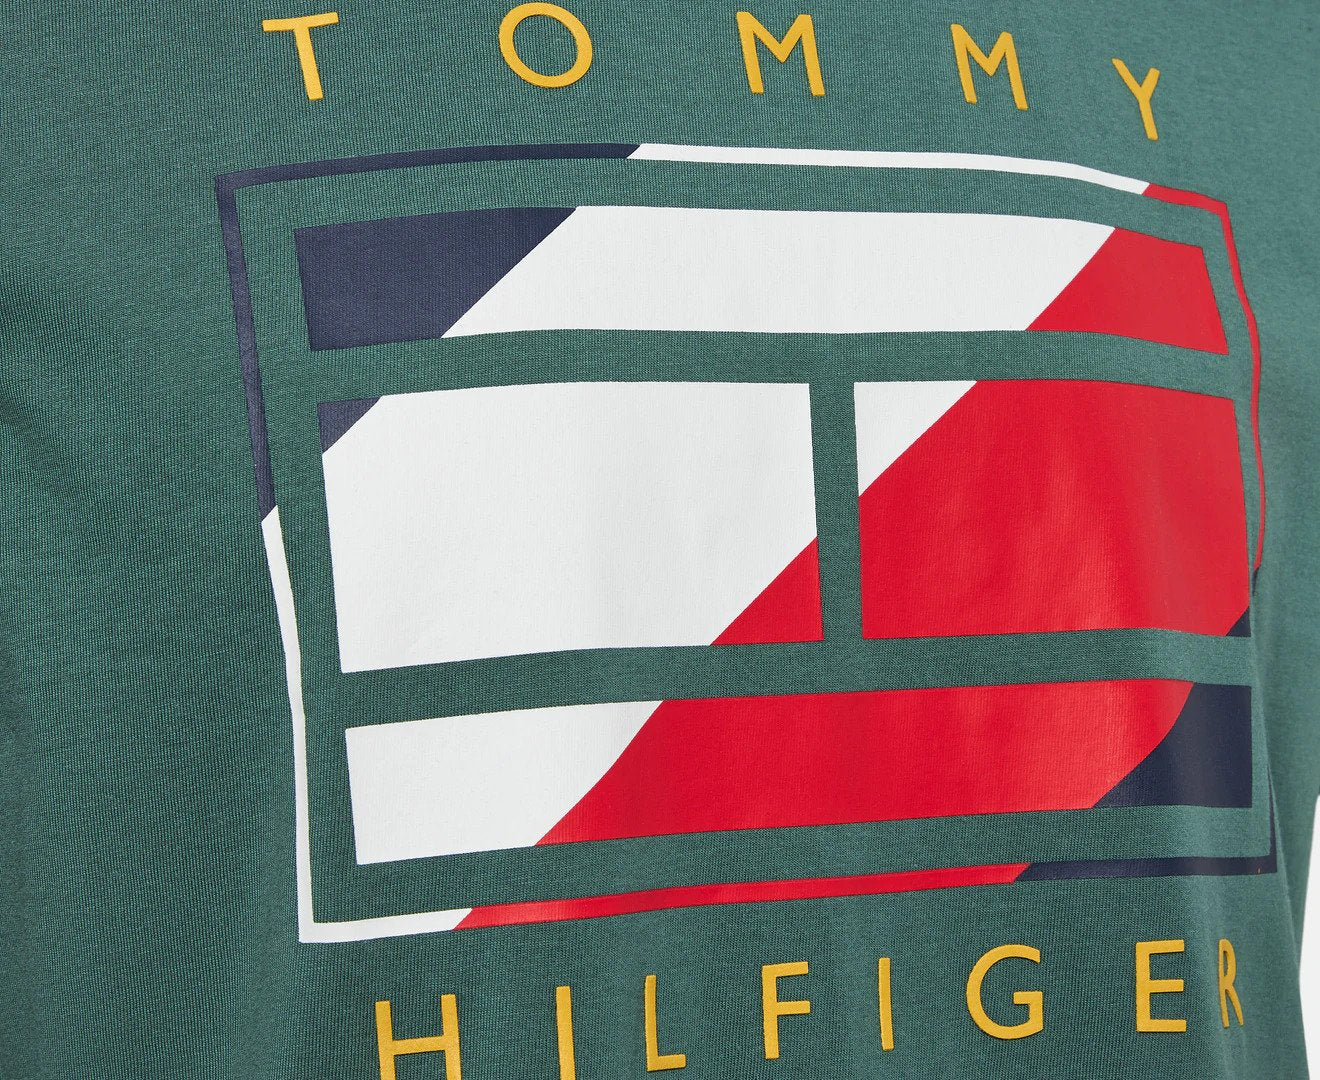 Tommy Hilfiger Men's Arrival Tee / T-Shirt / Tshirt - Erie Canal